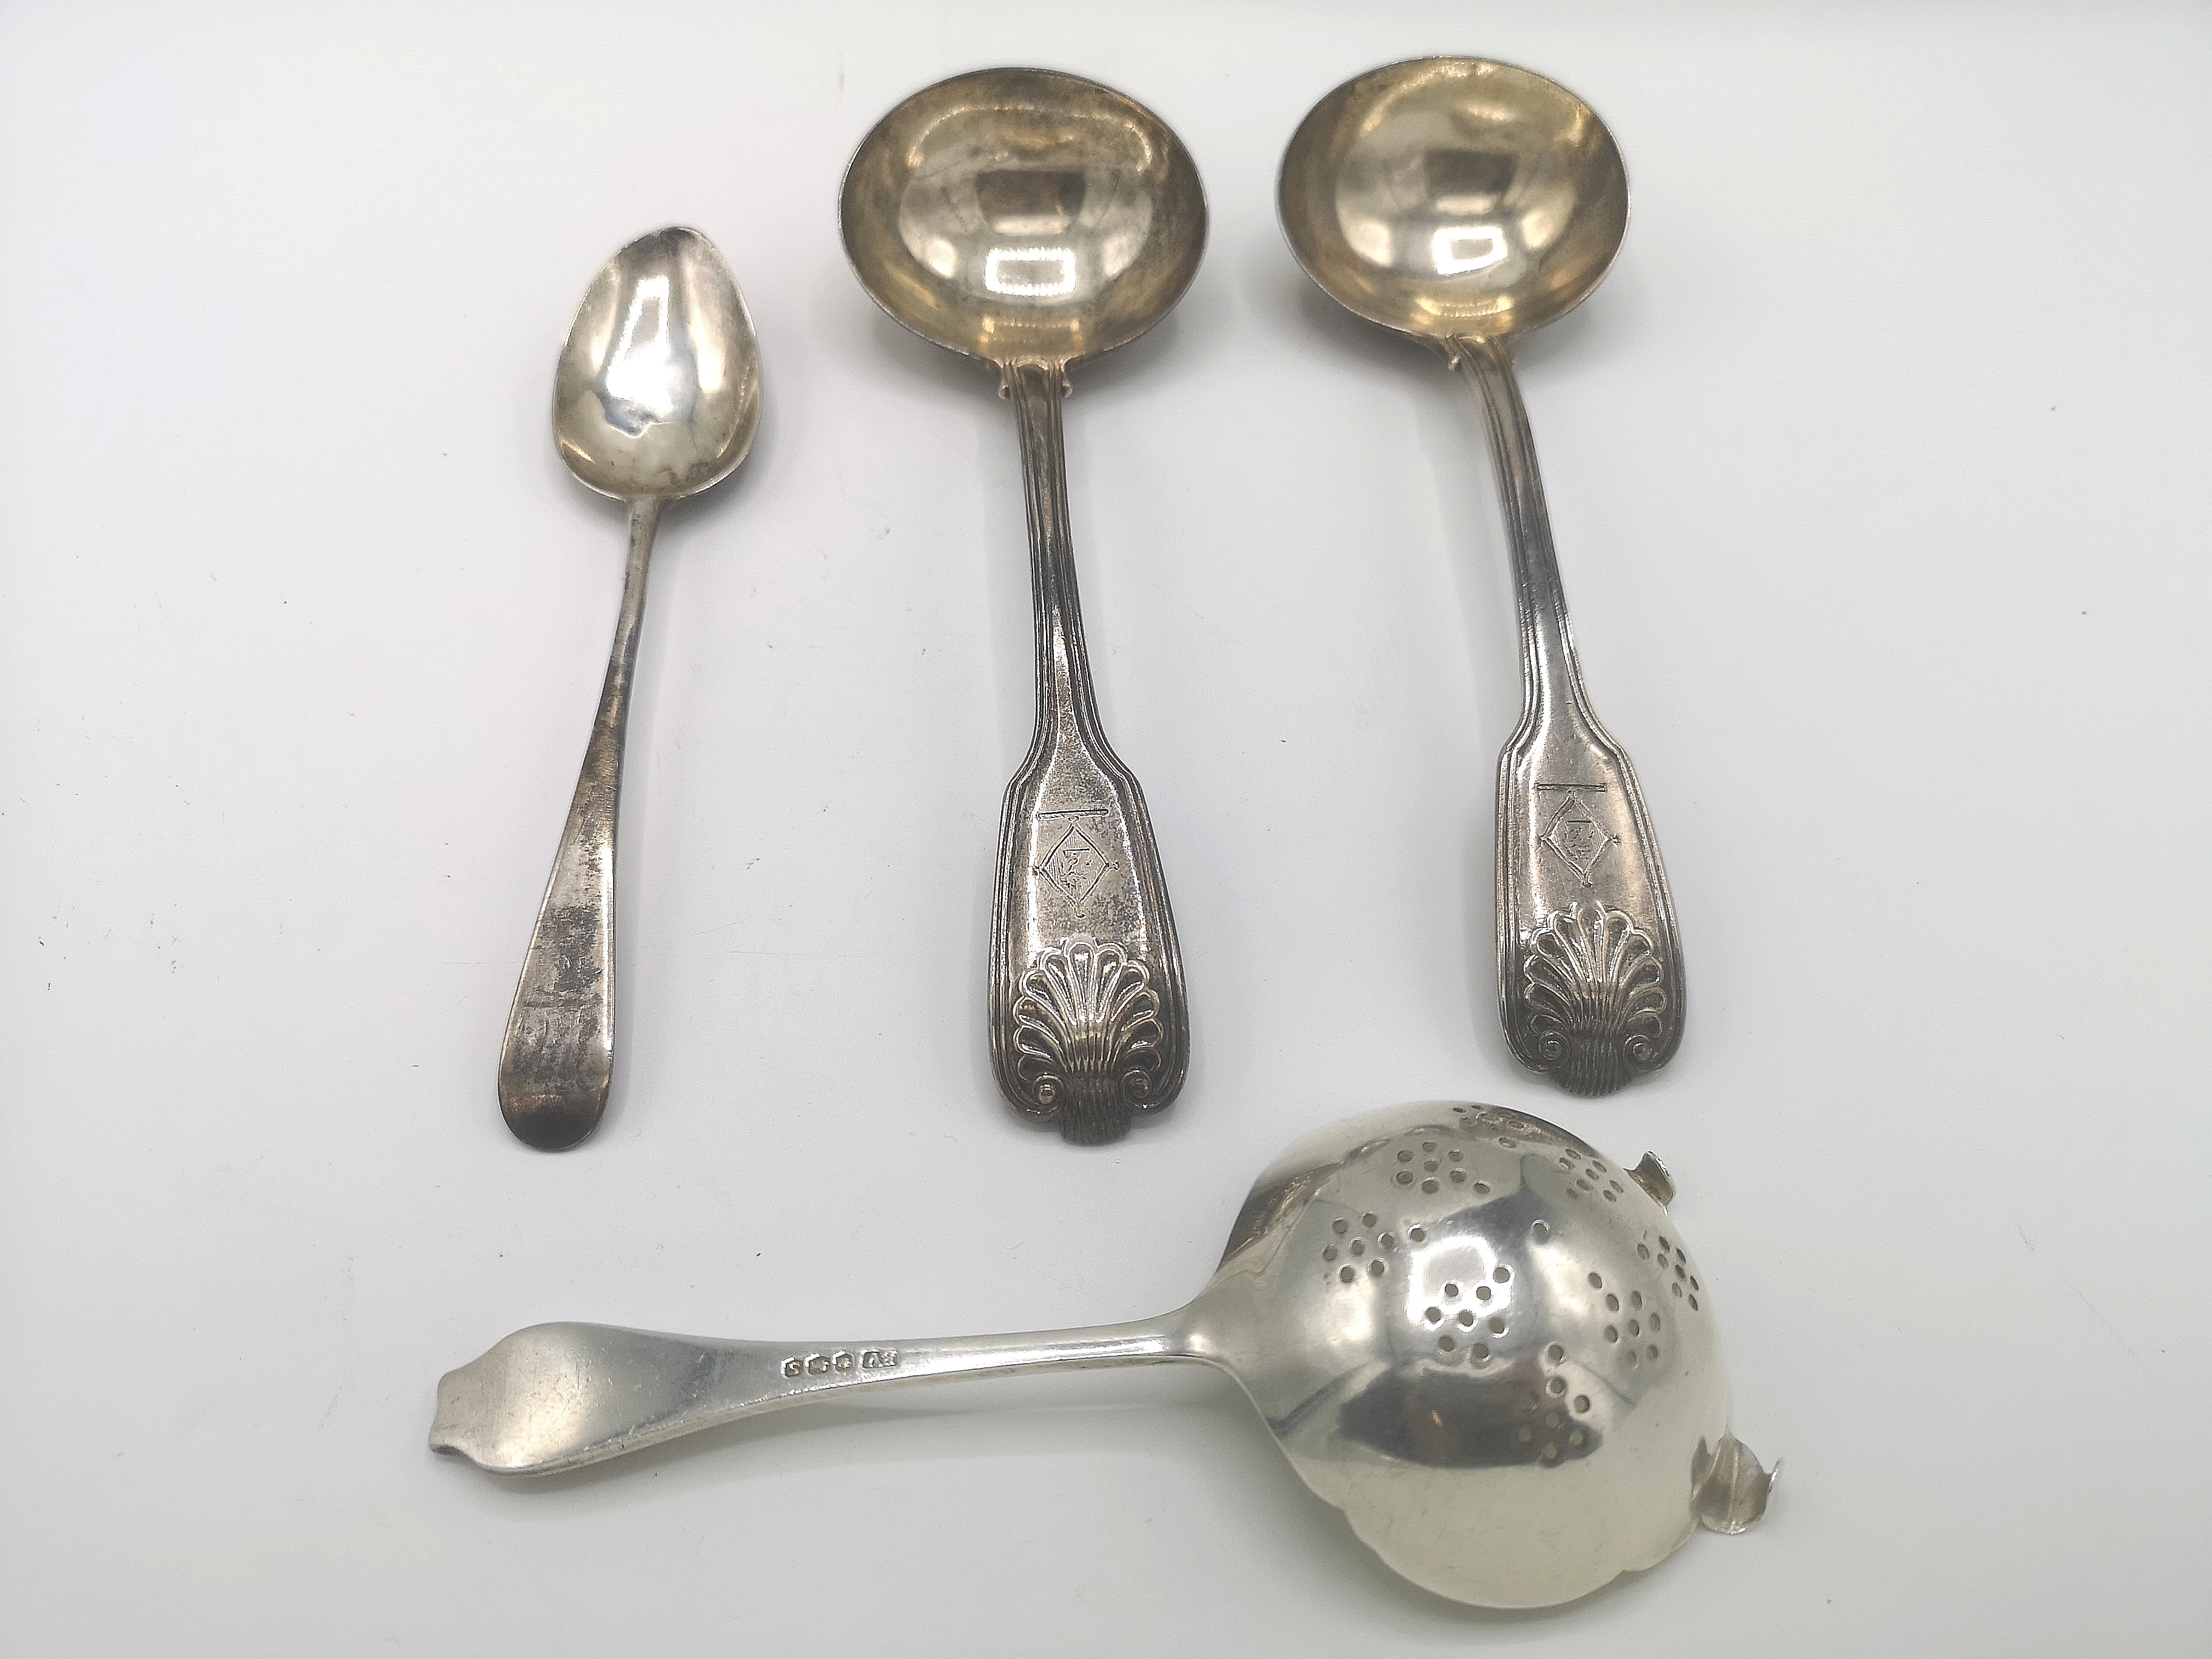 Silver tea strainer and other items